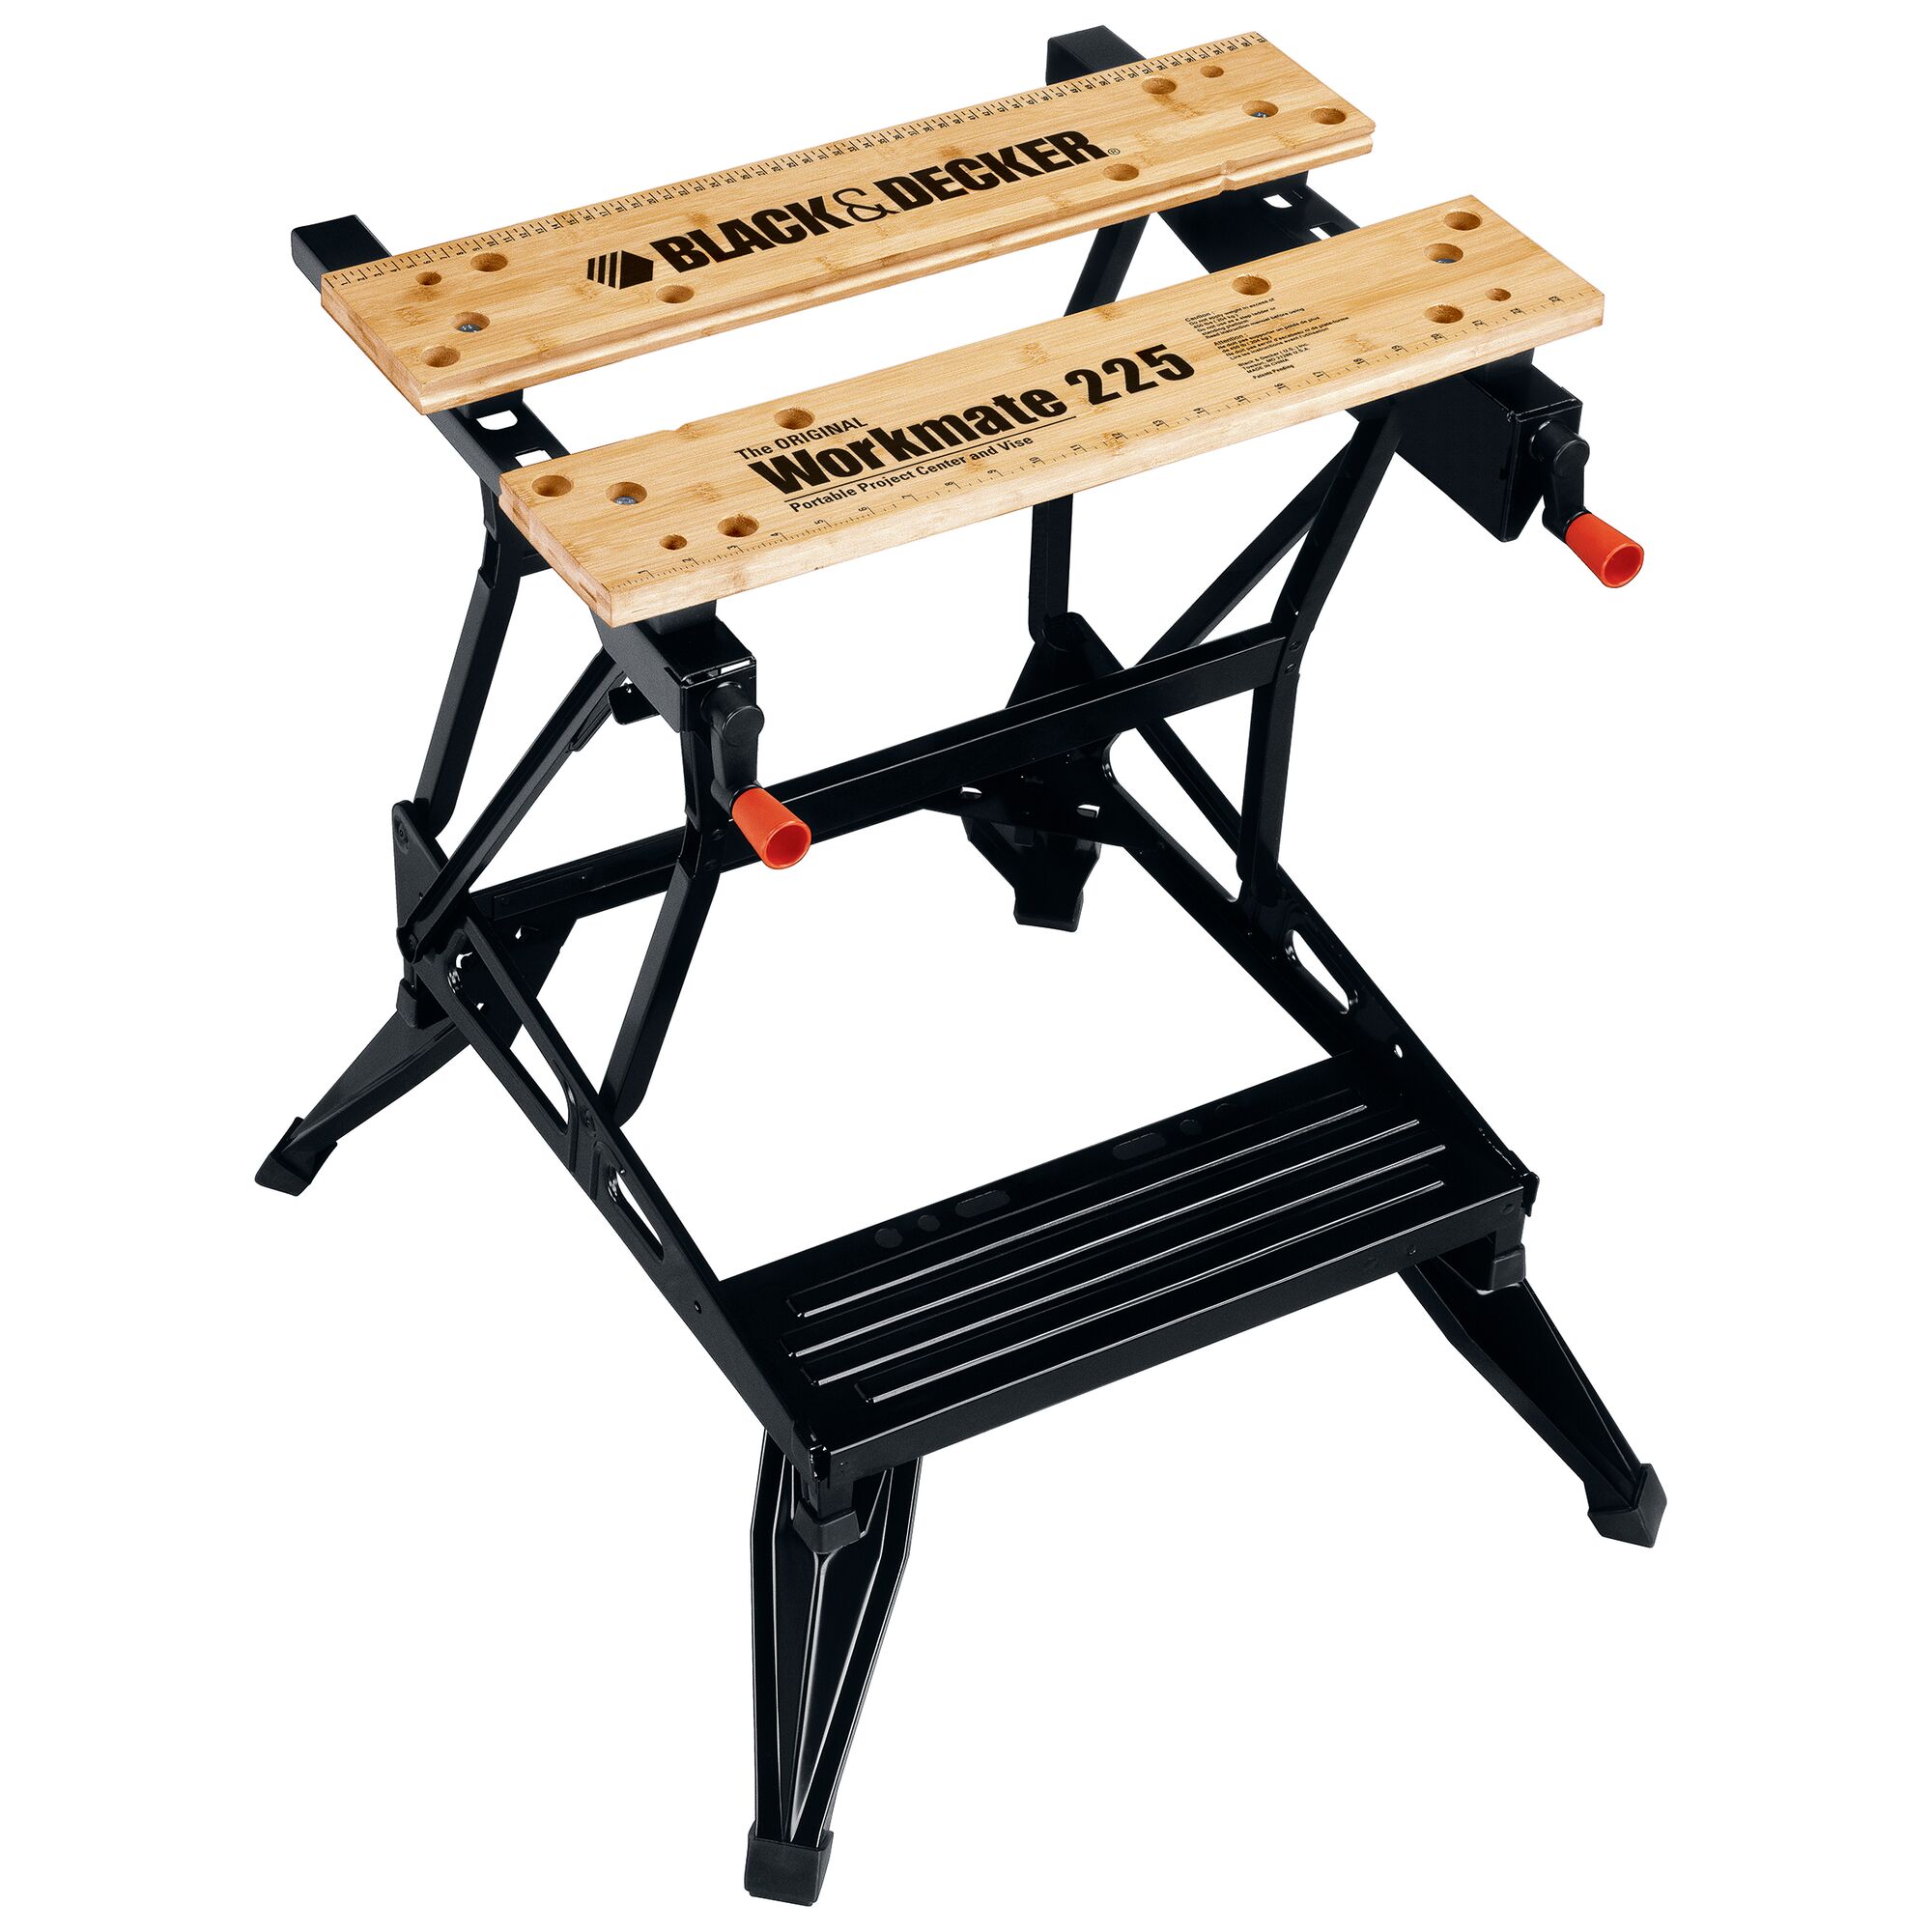 Profile of workmate 225 portable work center and vise.